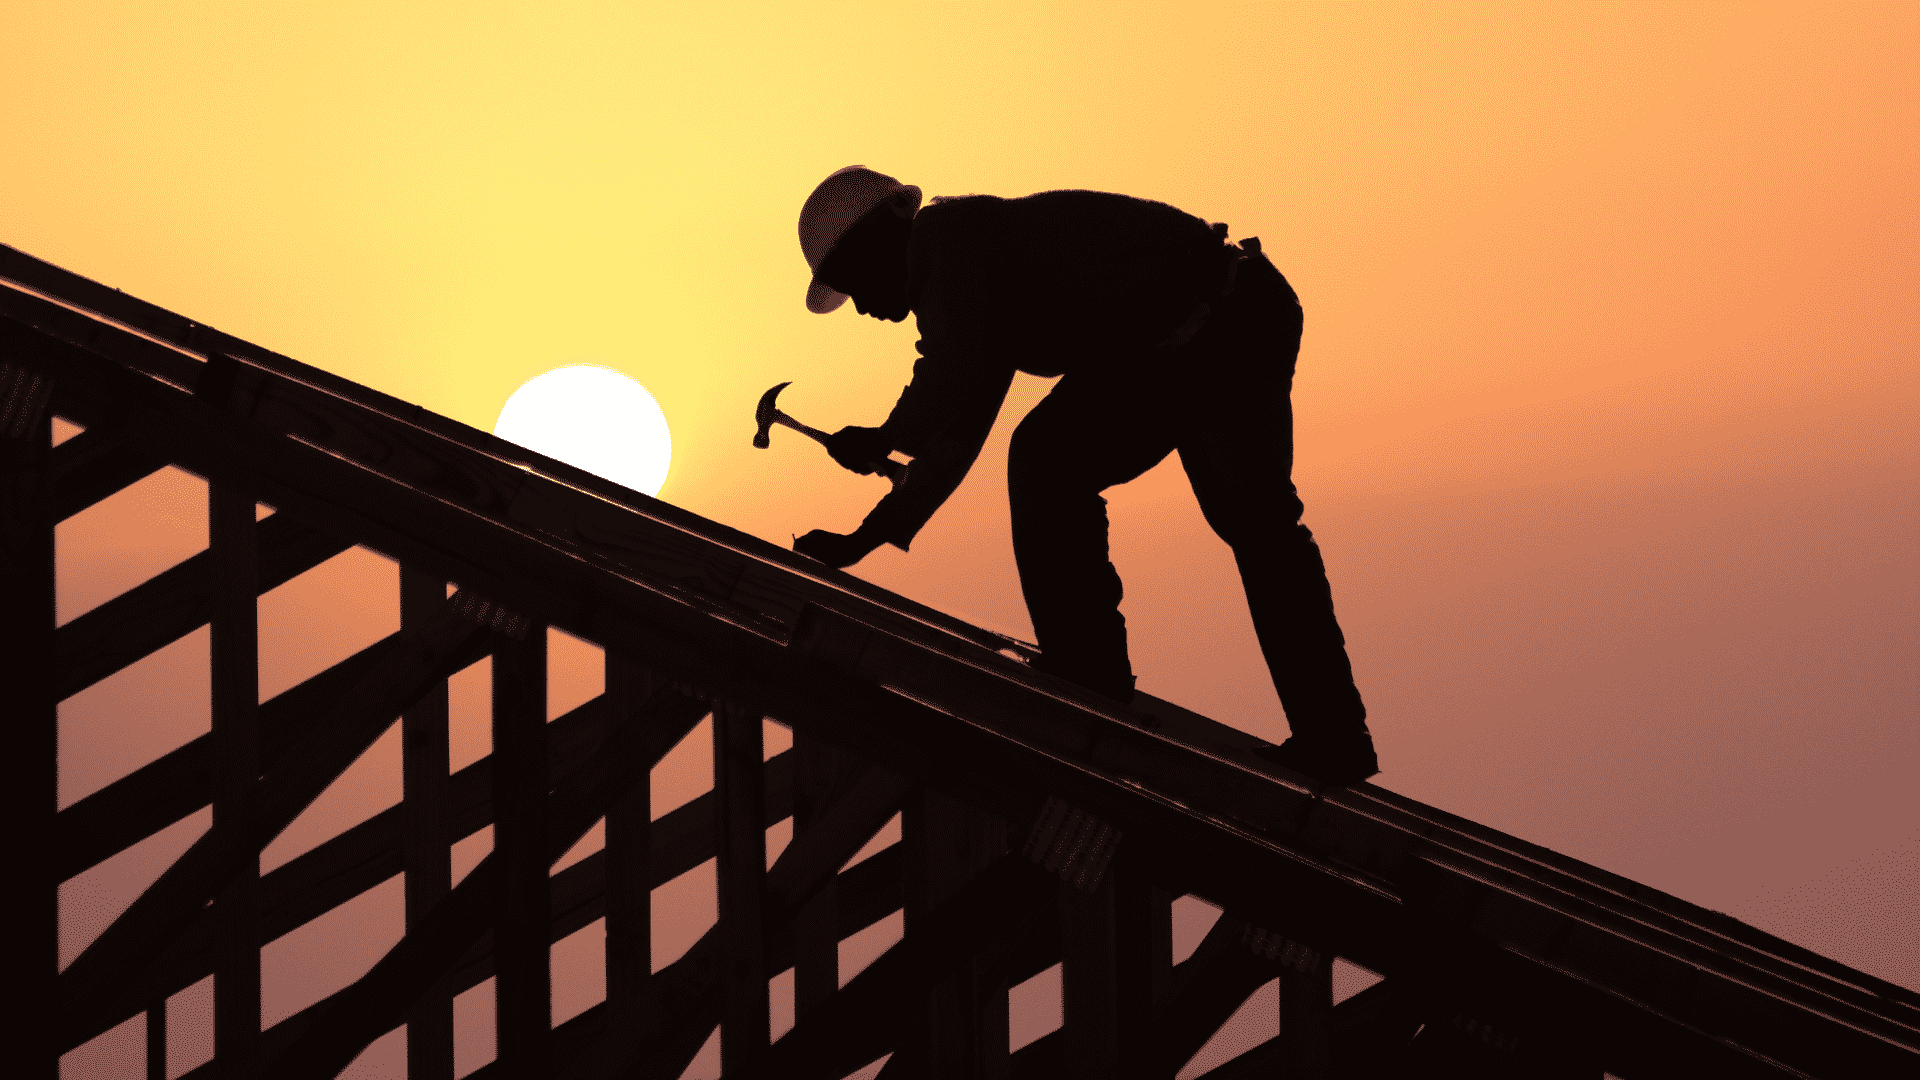 roofer silhouette